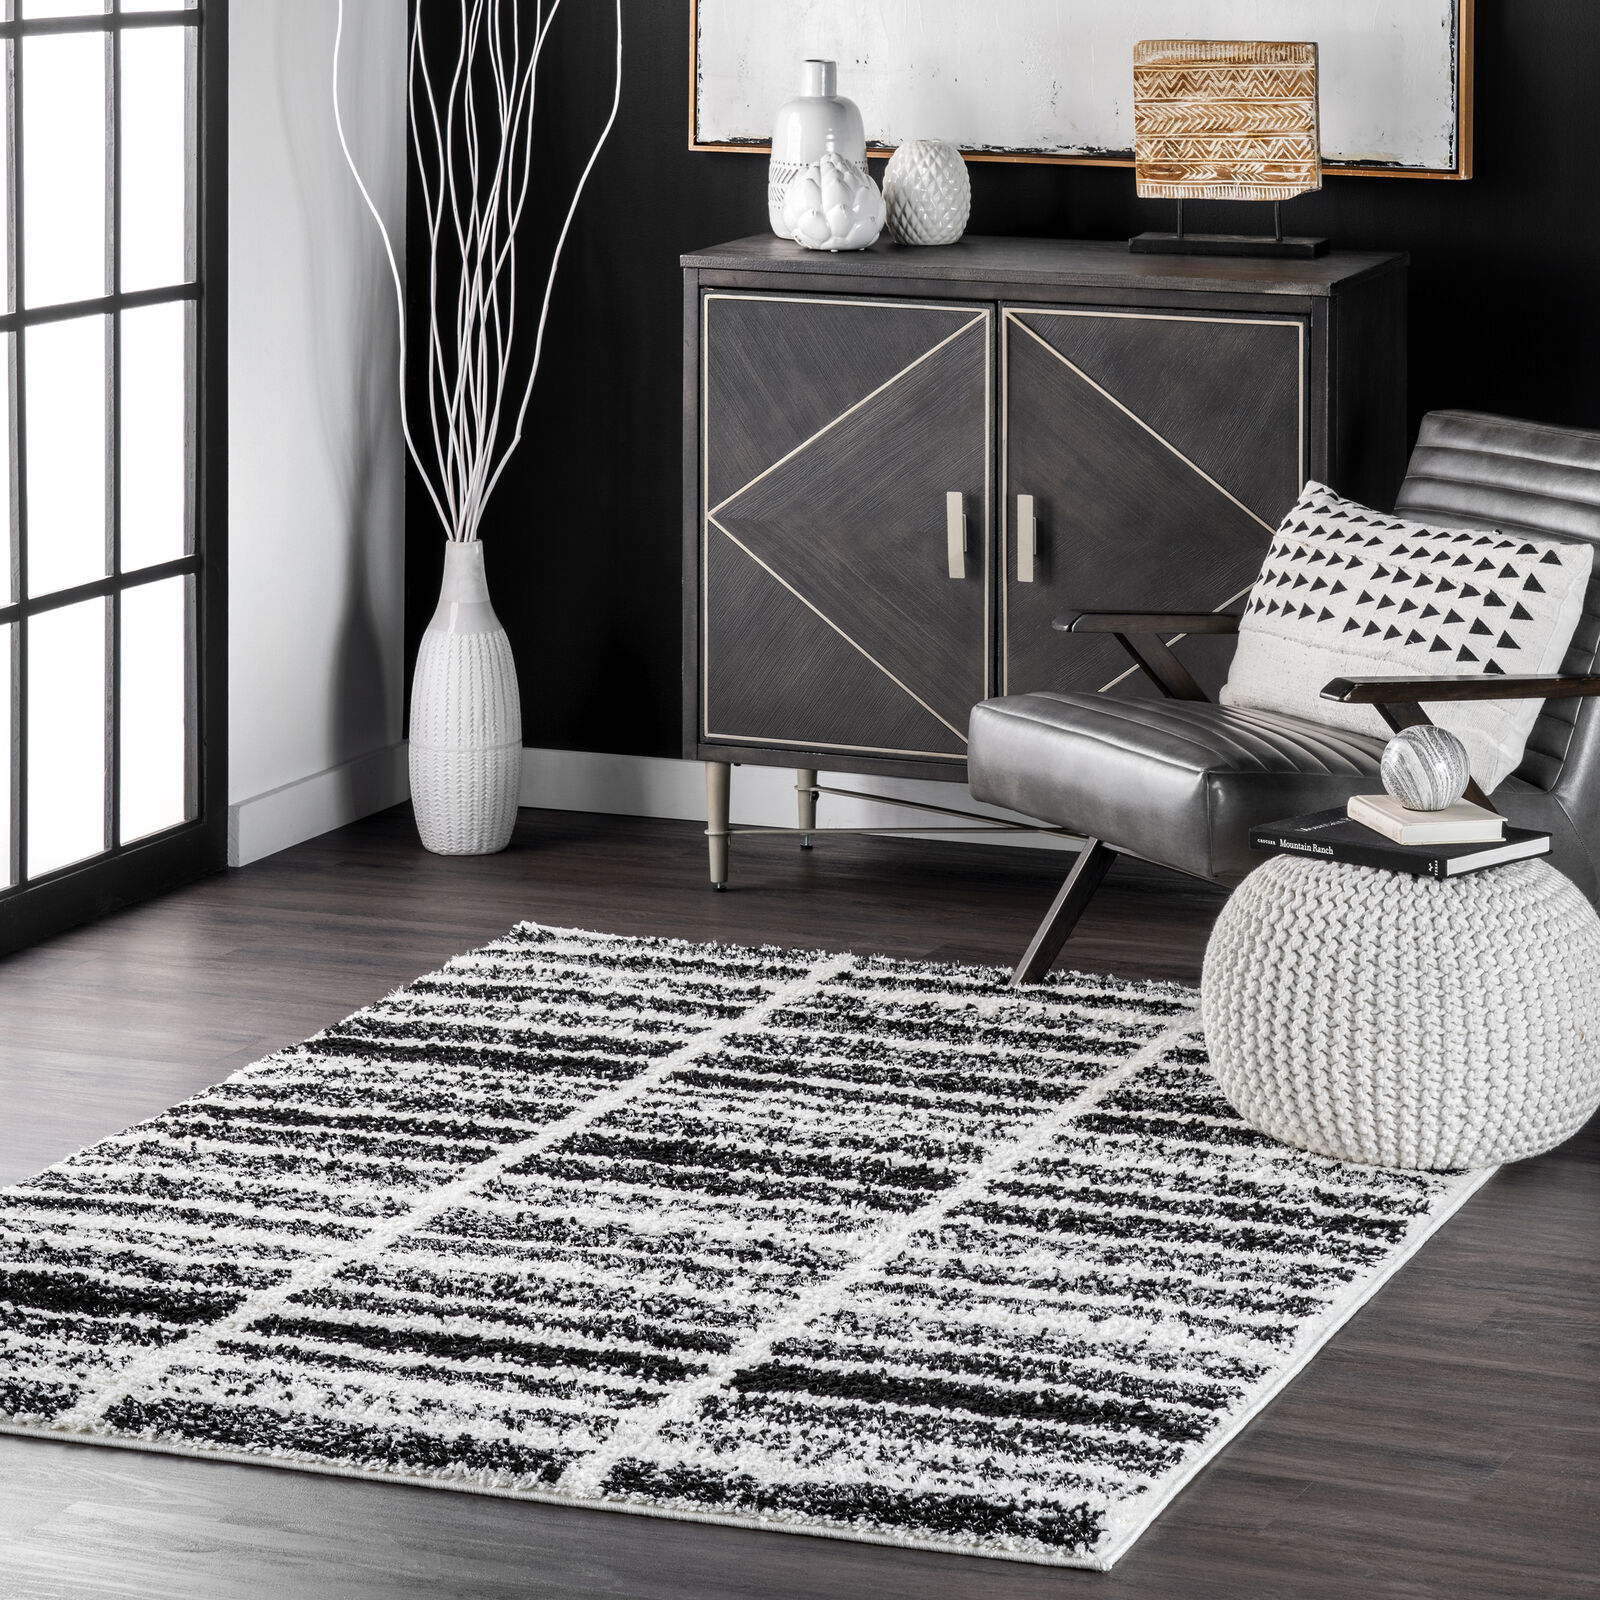 nuLOOM Celyn Distressed Stripes Cozy Shag Area Rug in Black And White